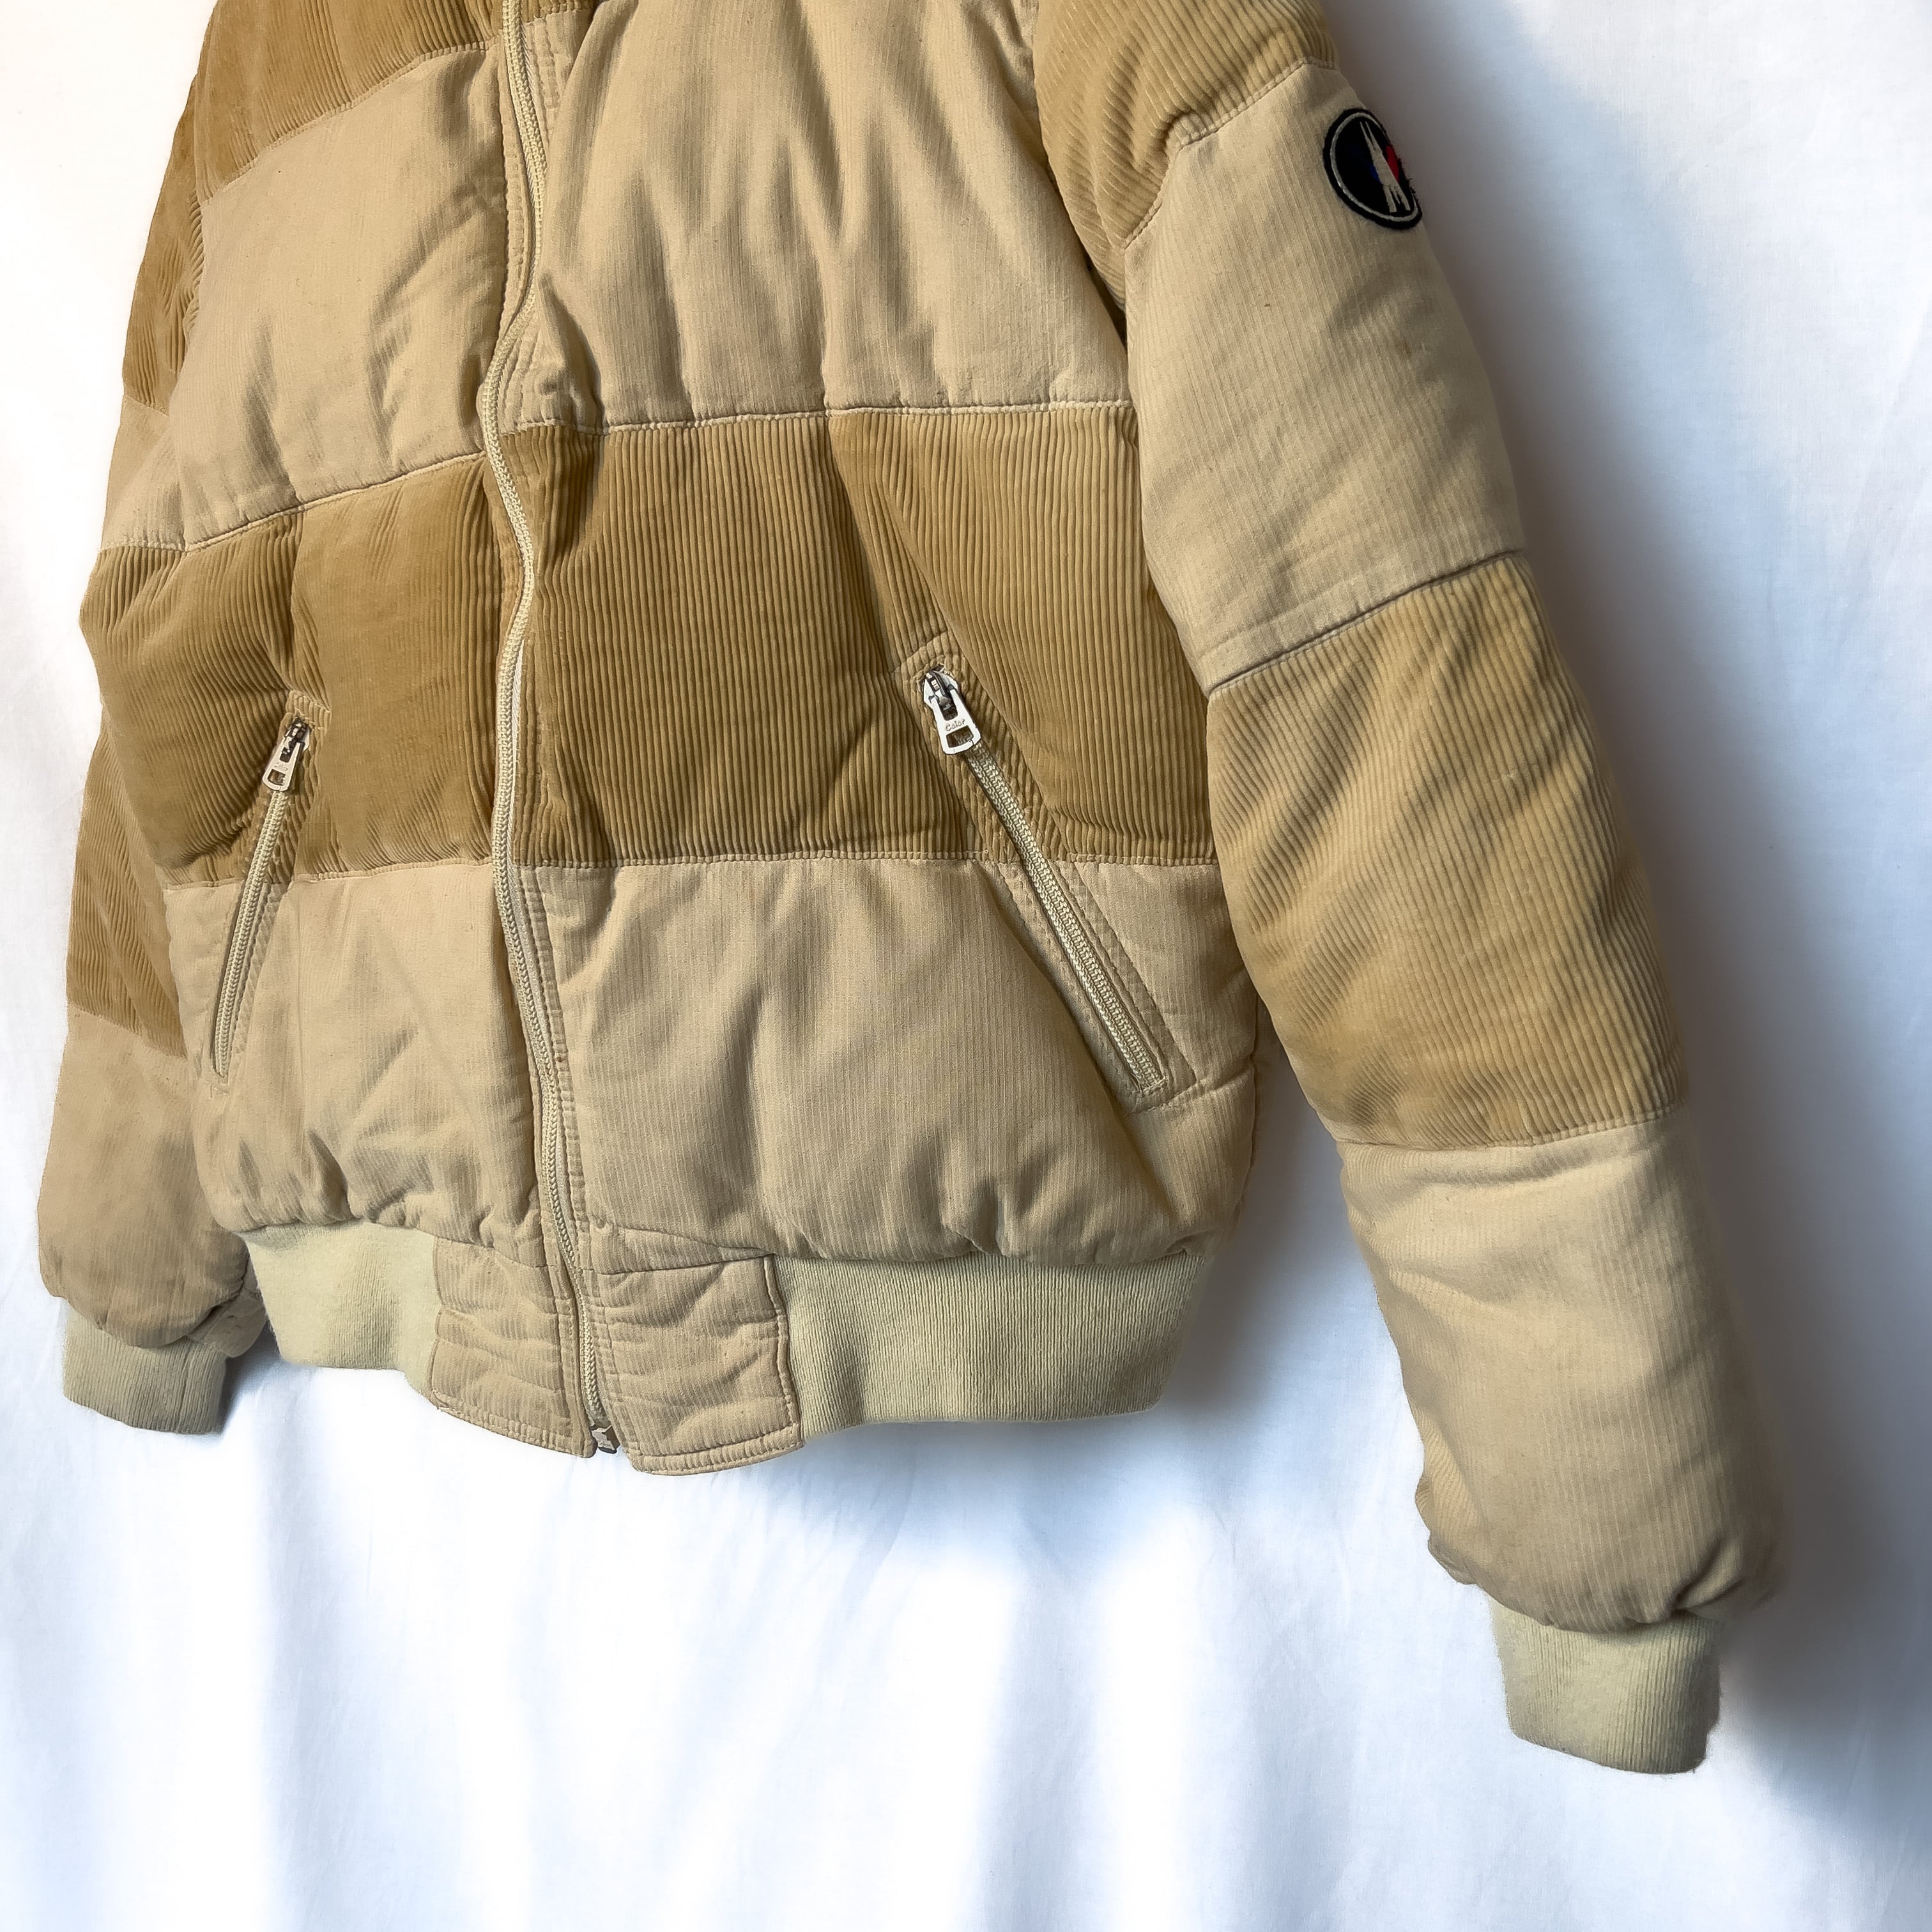 70s〜80s vintage moncler ski wear ヴィンテージモンクレール ダウン